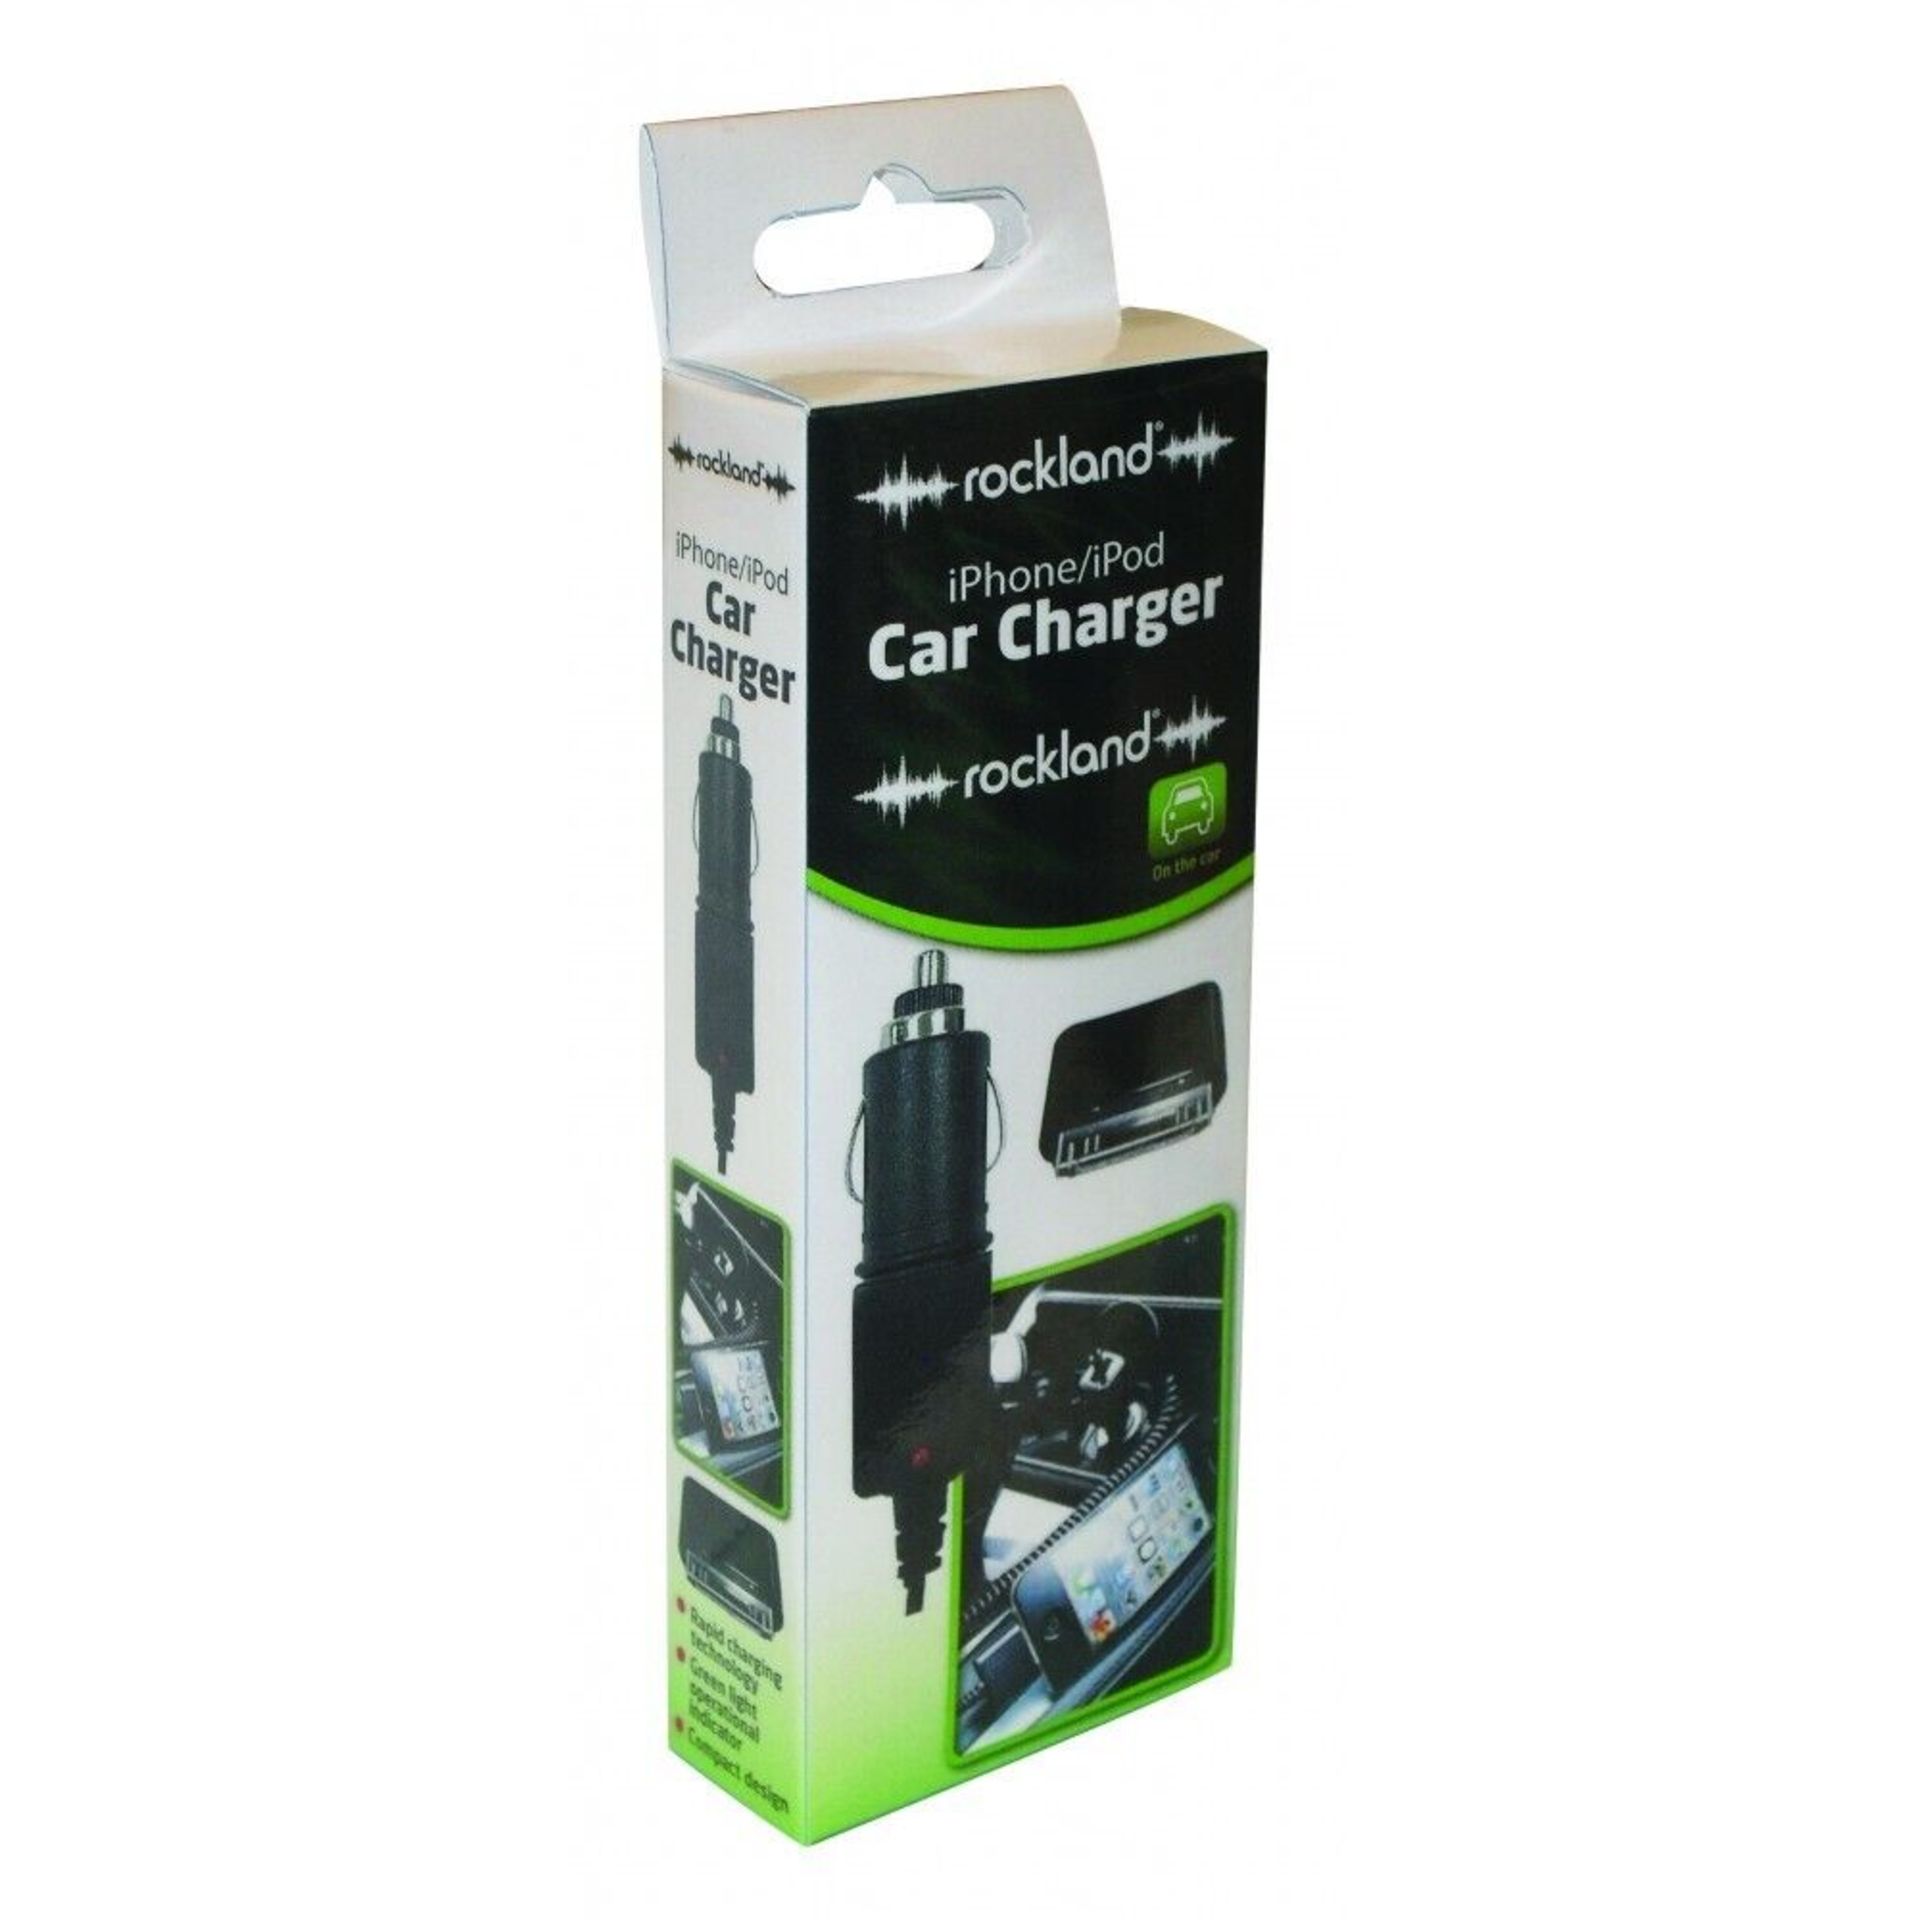 20 X ROCKLAND IPHONE/IPOD IN CAR CHARGER IPHONE 3G, 3GS, 4, 4S, IPOD, IPOD TOUCH RRP £119.80